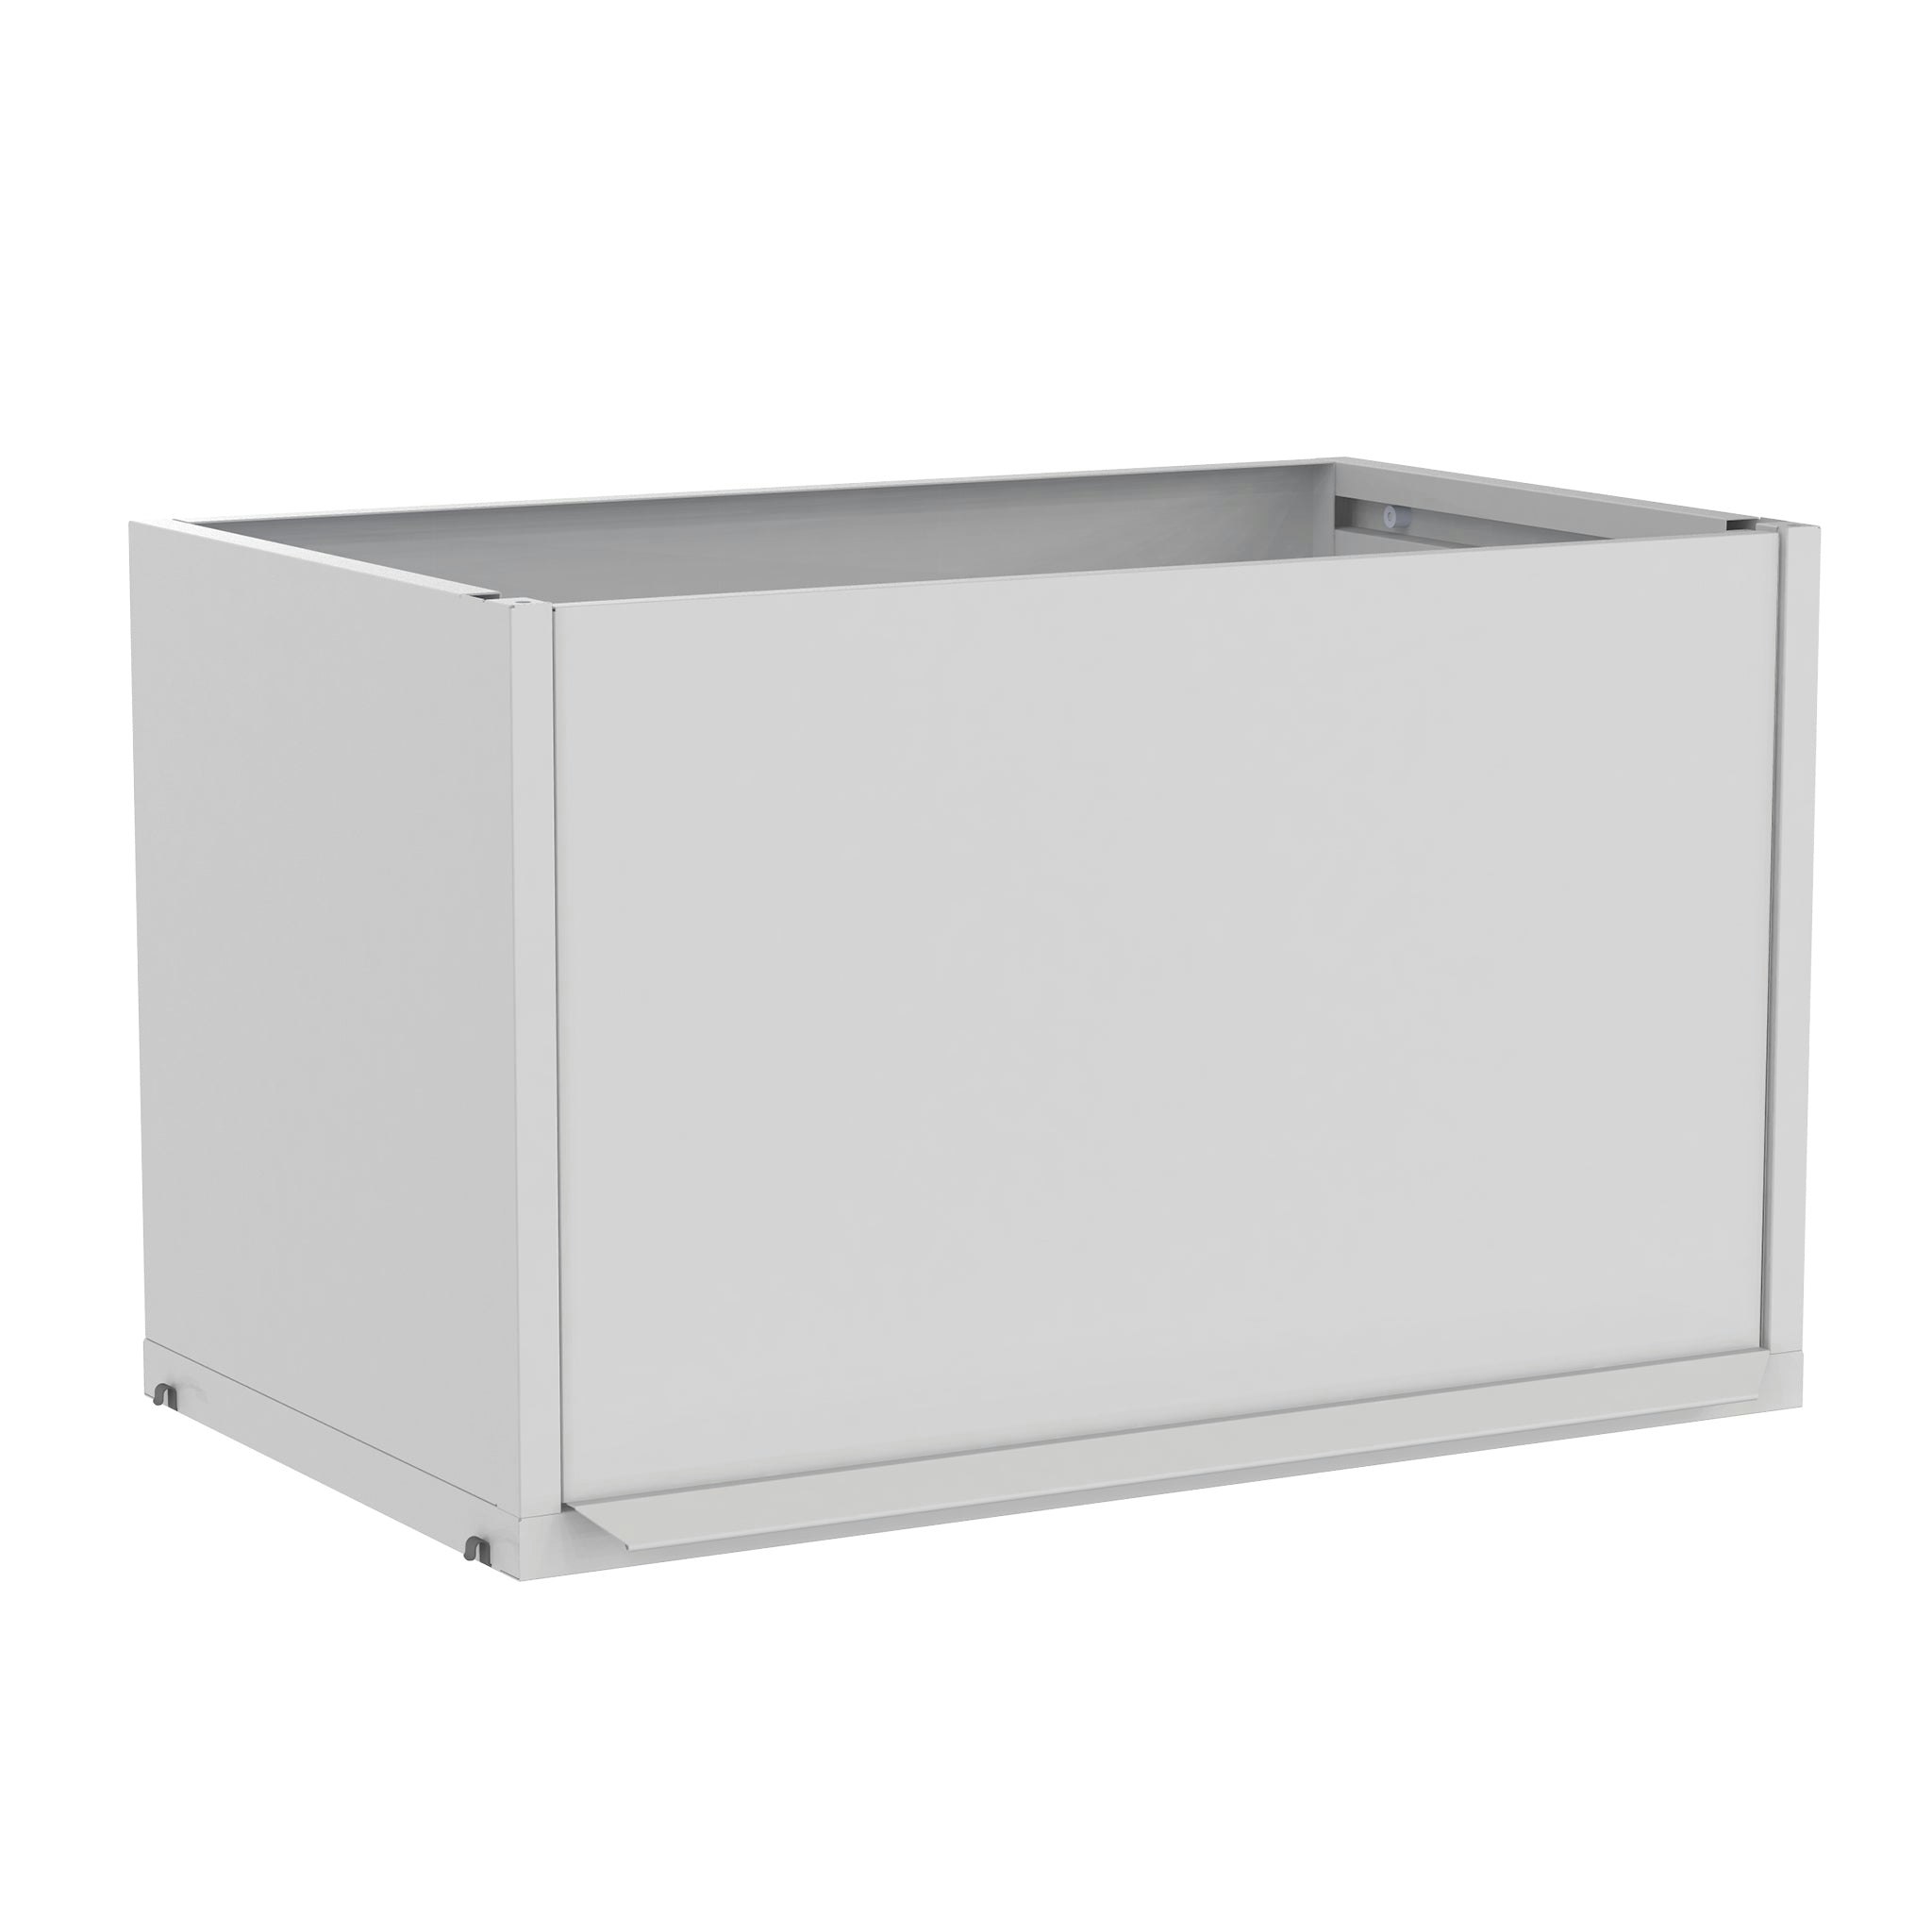 TRIA Storage System - Cabinet by Mobles 114